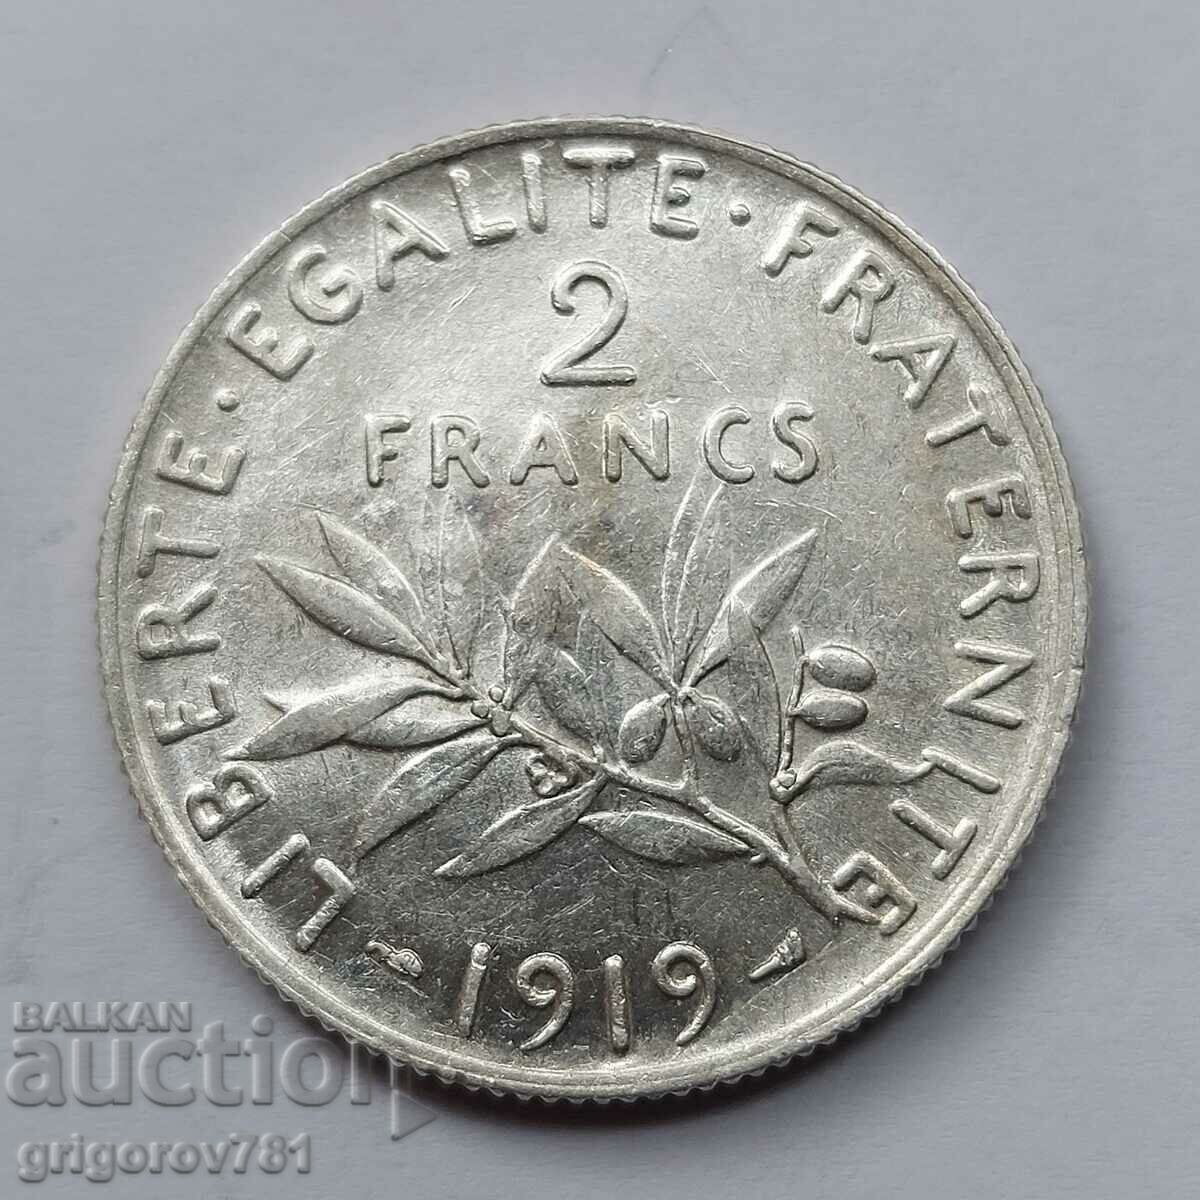 2 Francs Silver France 1919 - Silver Coin #142